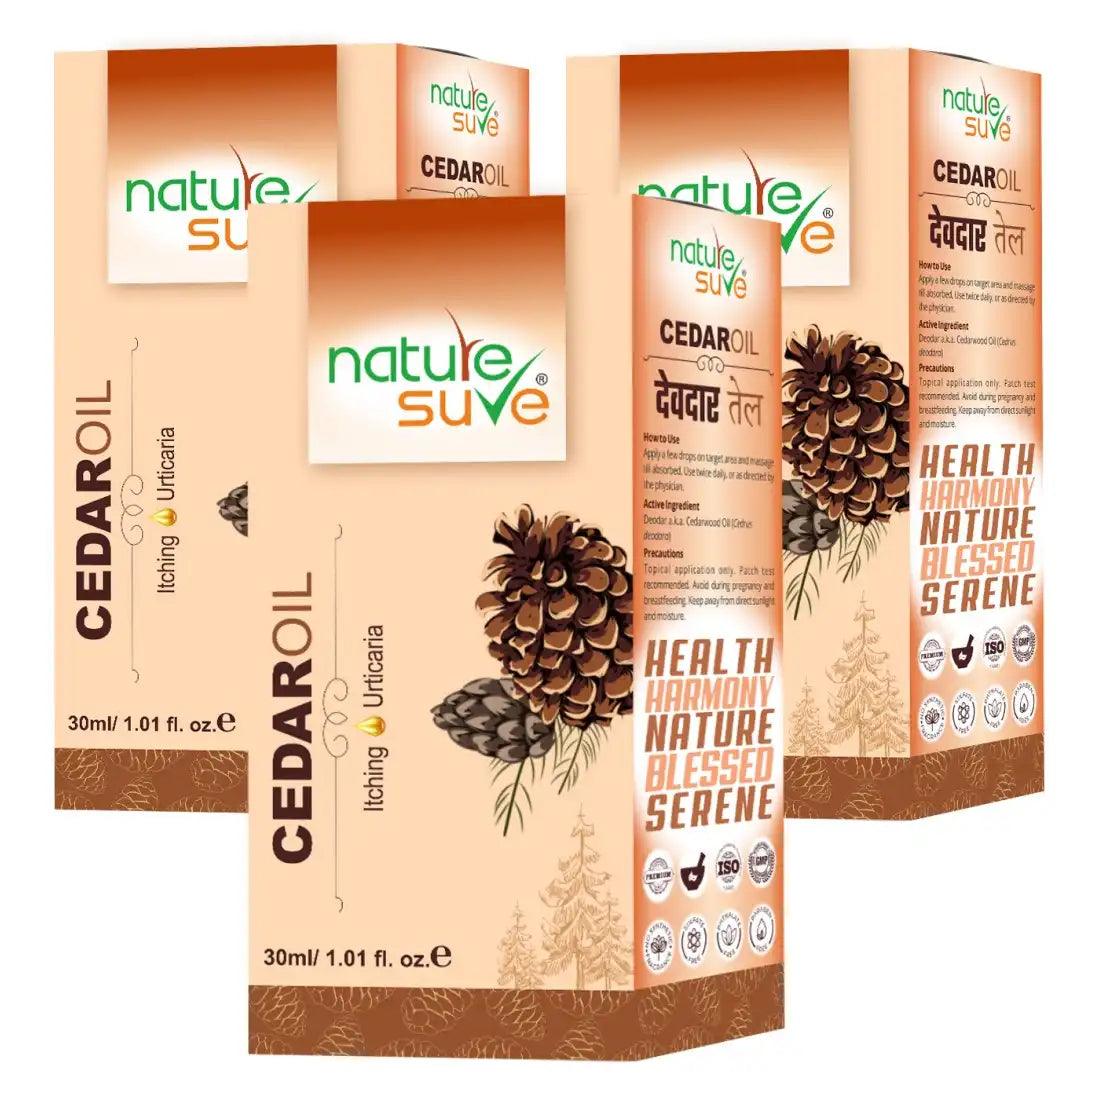 Buy 3 Packs Nature Sure Cedar Oil Deodar Oil for Itching and Urticaria - everteen-neud.com